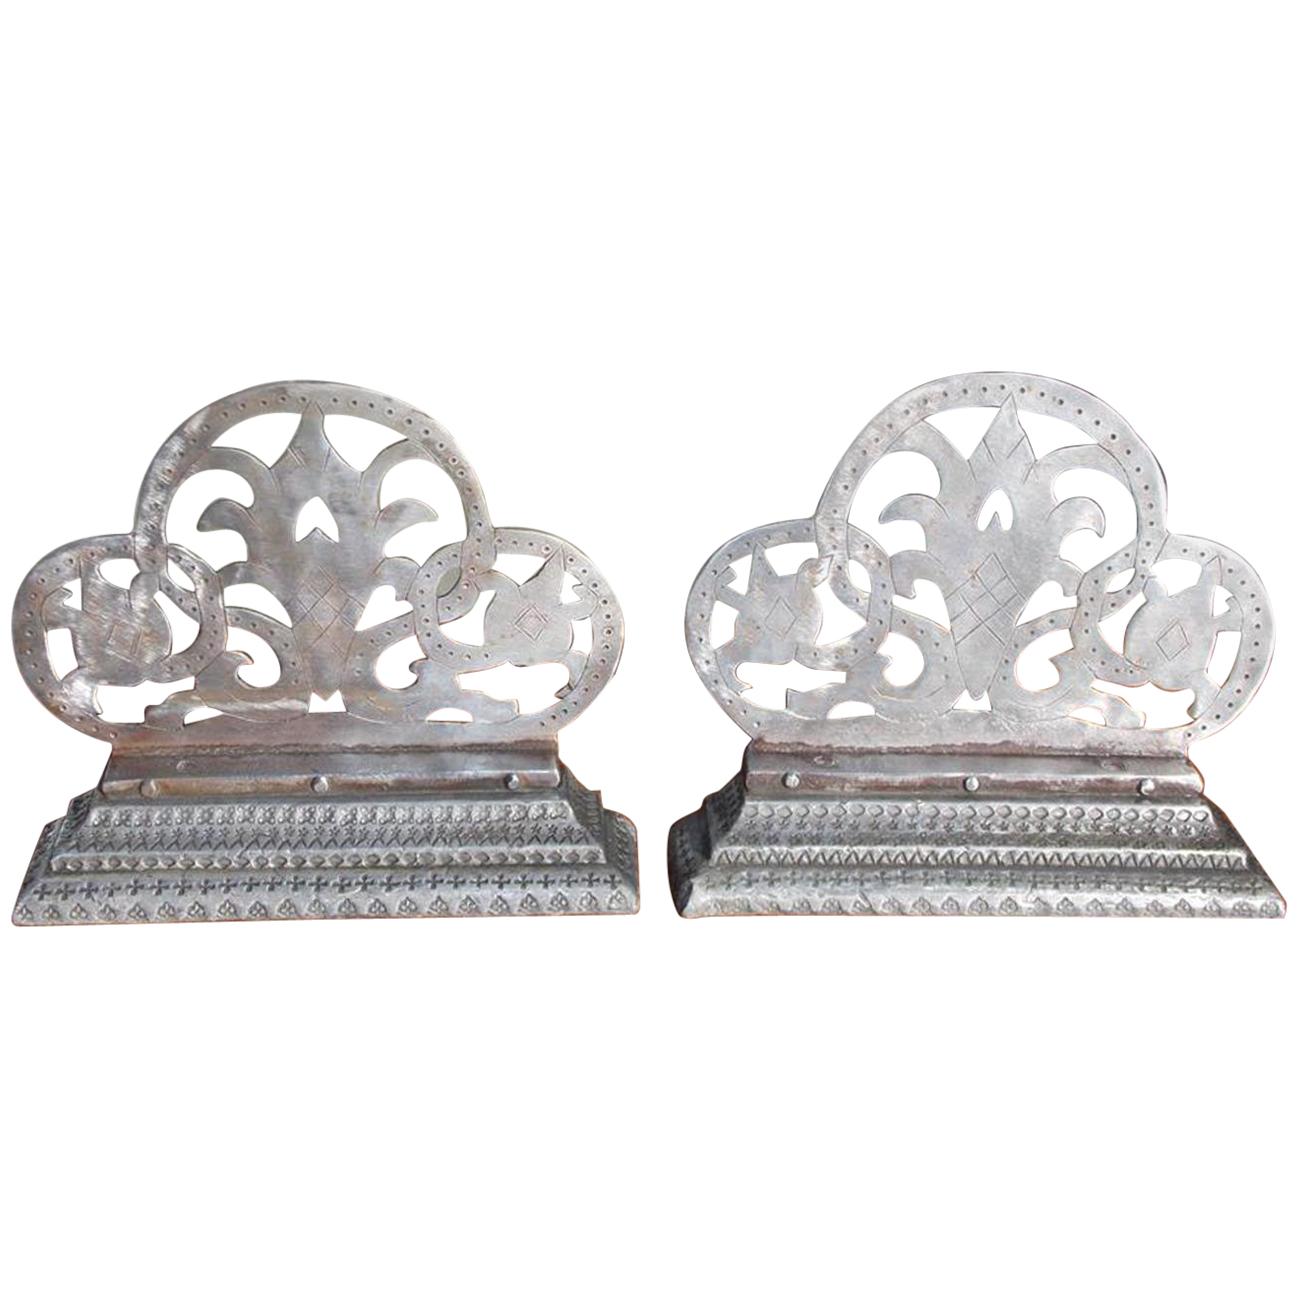 Pair of English Polished Steel Hand Chase Decorative Floral Bookends, Circa 1830